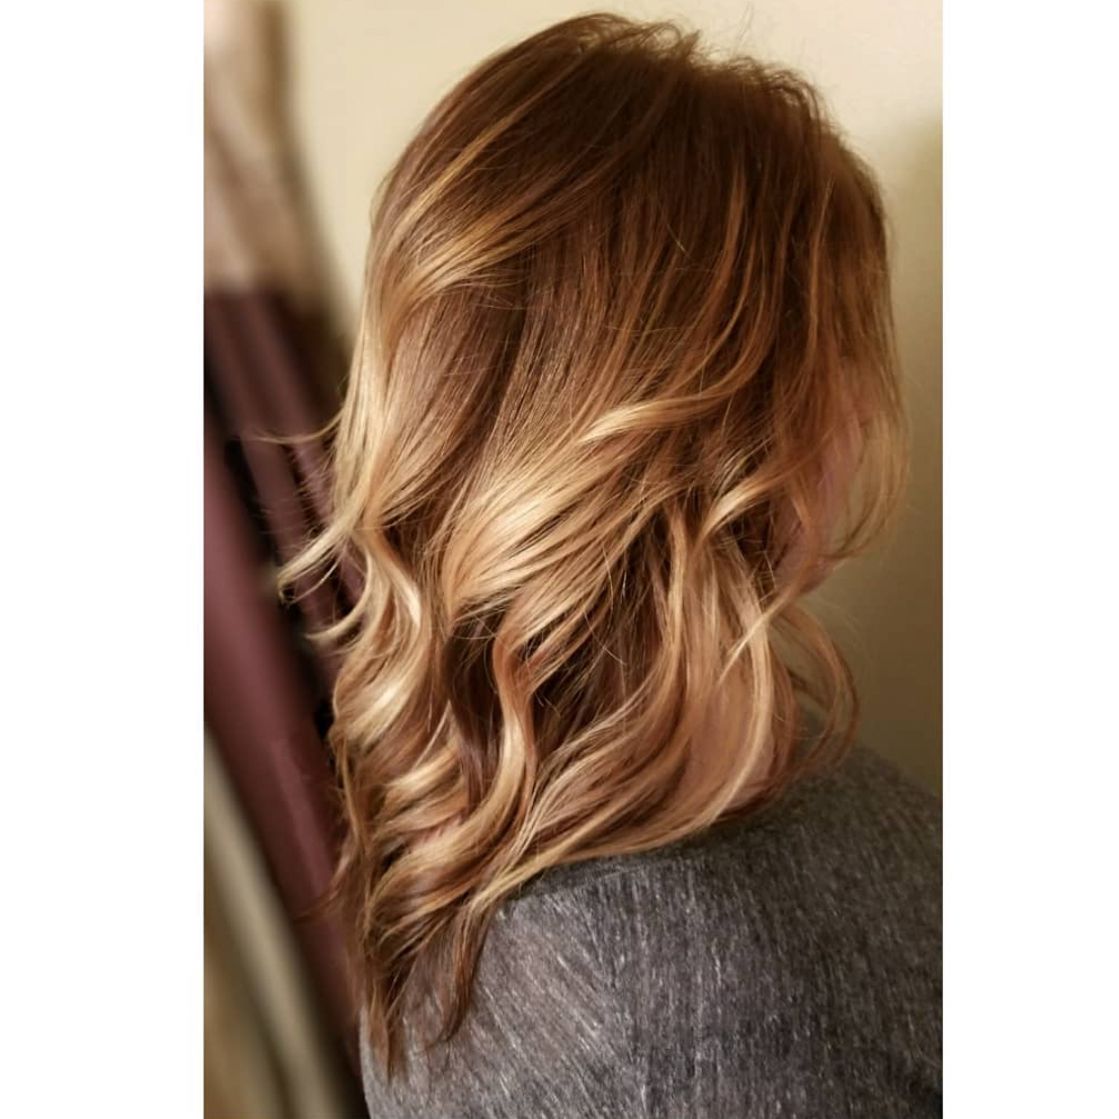 These Dark Blonde Color Ideas Are Low Maintenance Goals